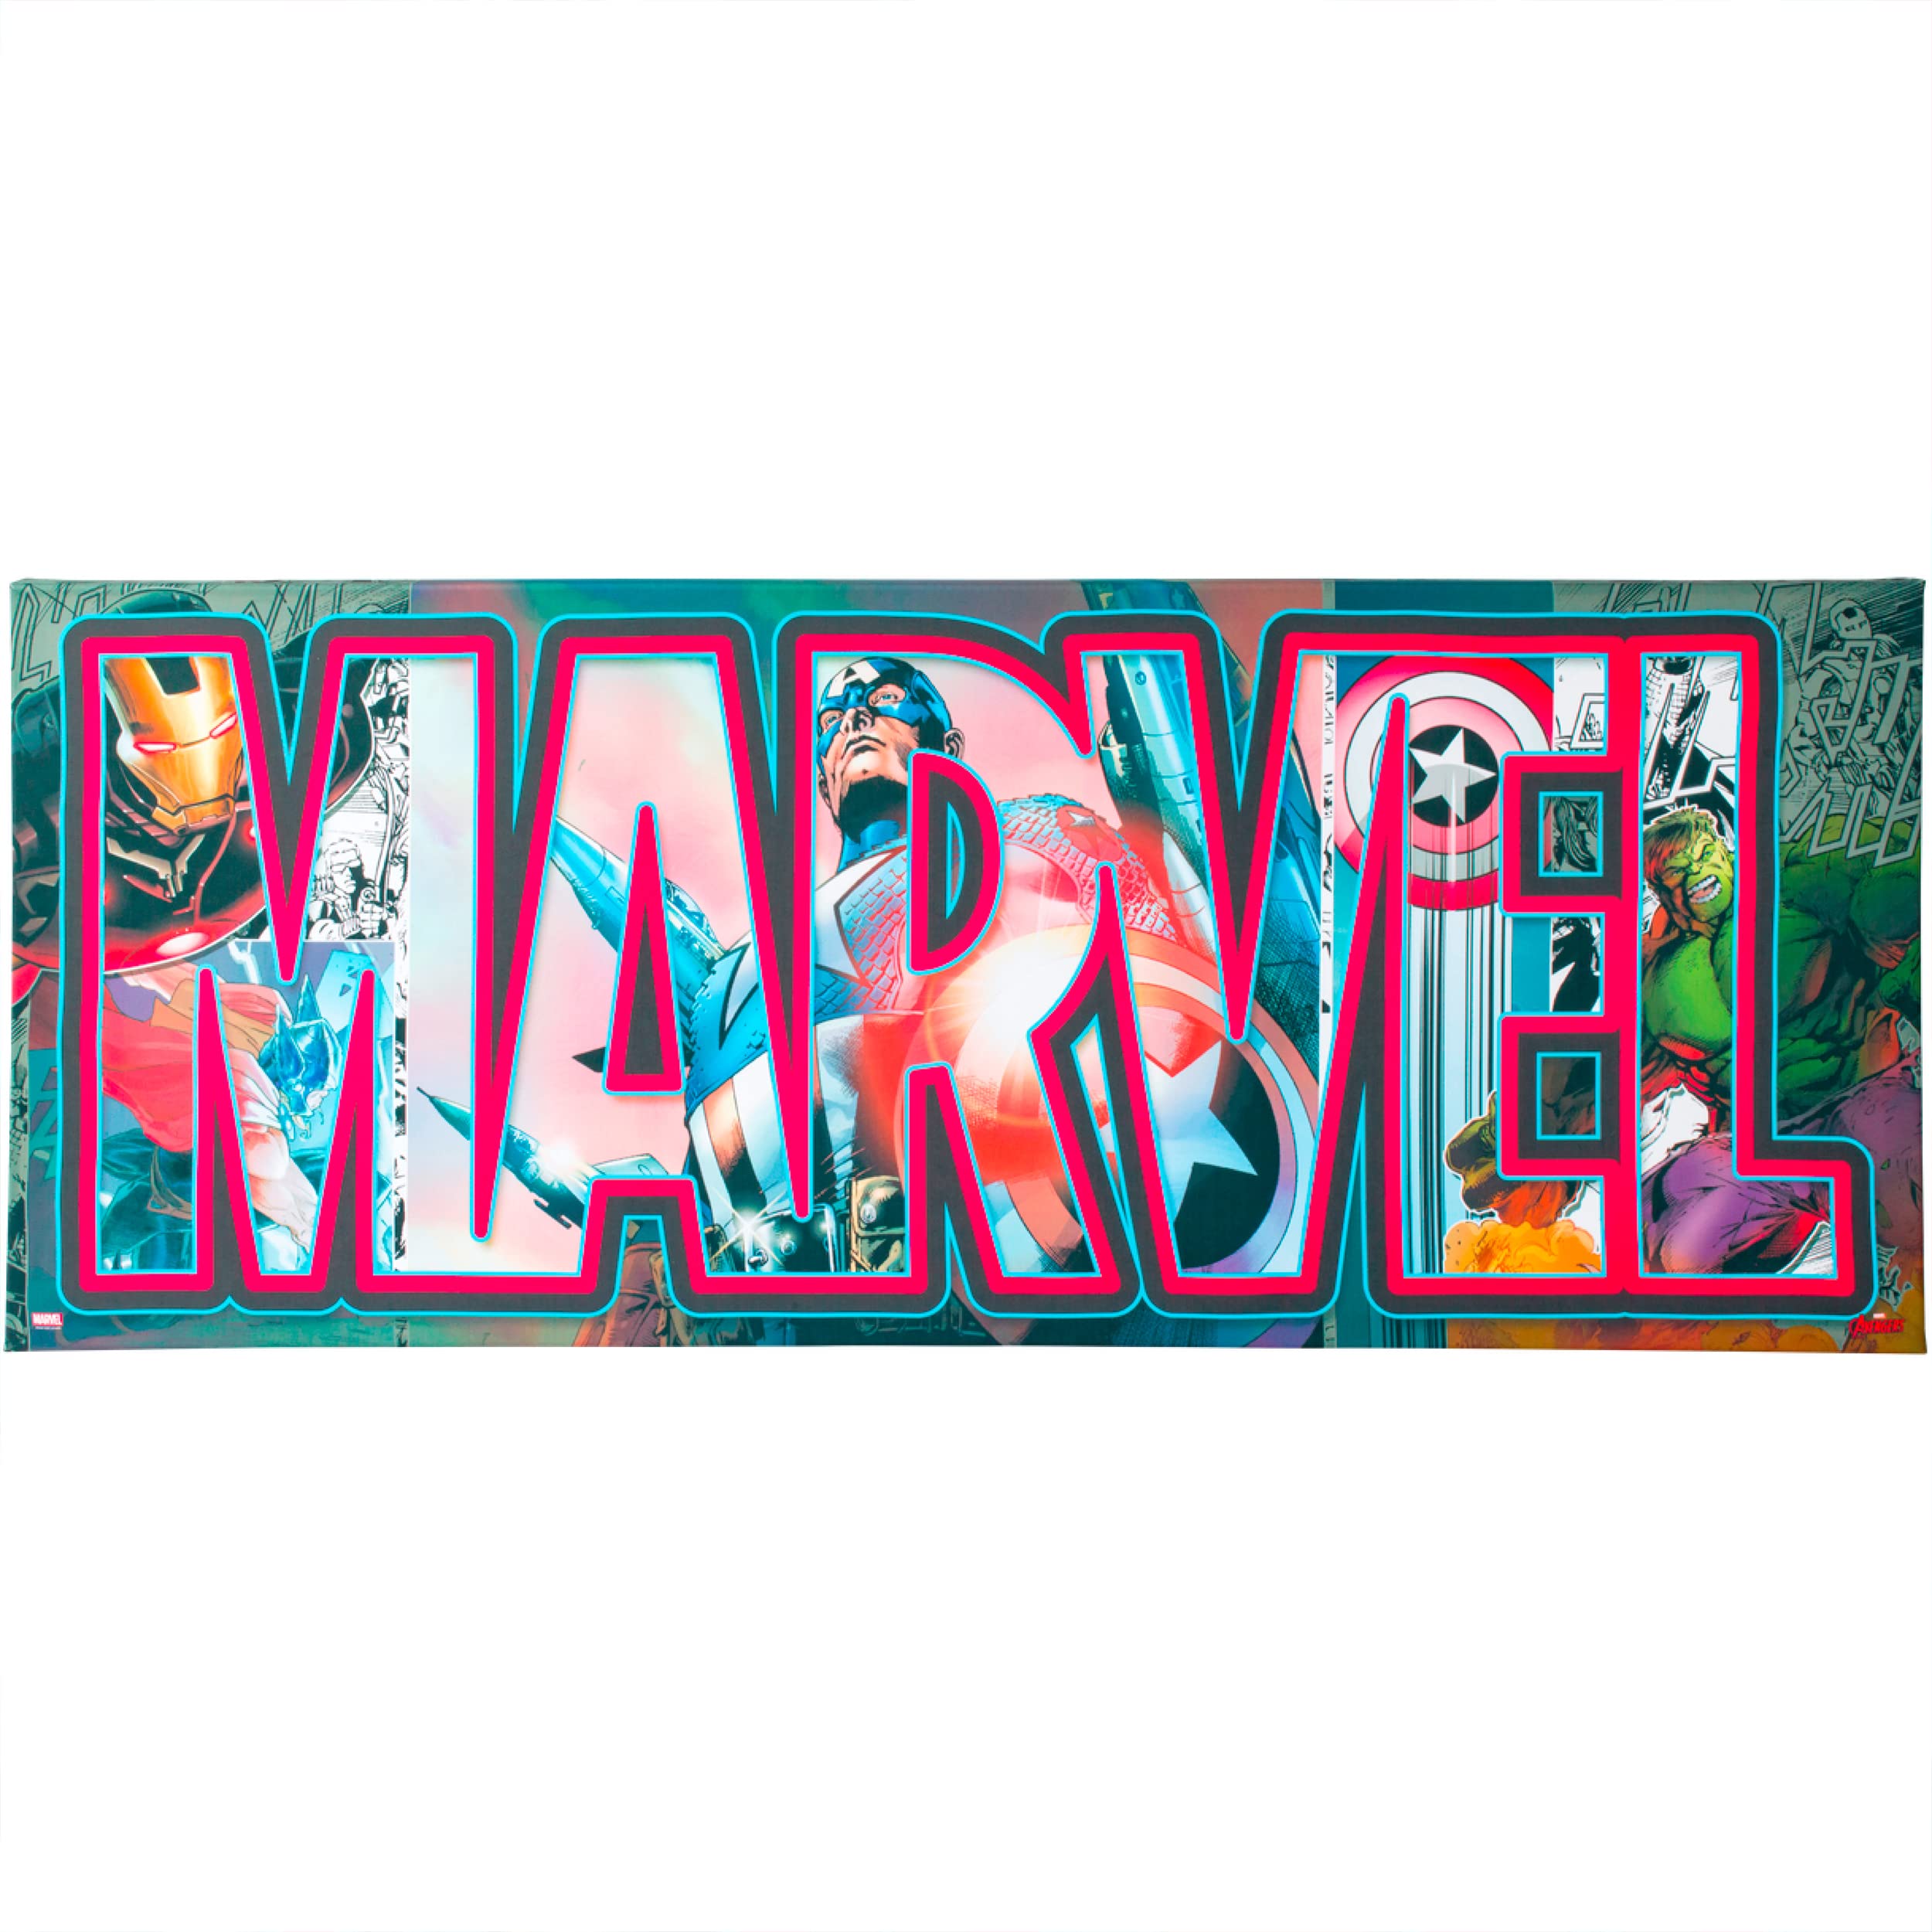 Book Cover Silver Buffalo Canvas Letters Wall Art Poster Room Decor Featuring Captain America, Hulk, Thor, and Iron Man, 30 x 12 inches, Marvel Avengers, Office